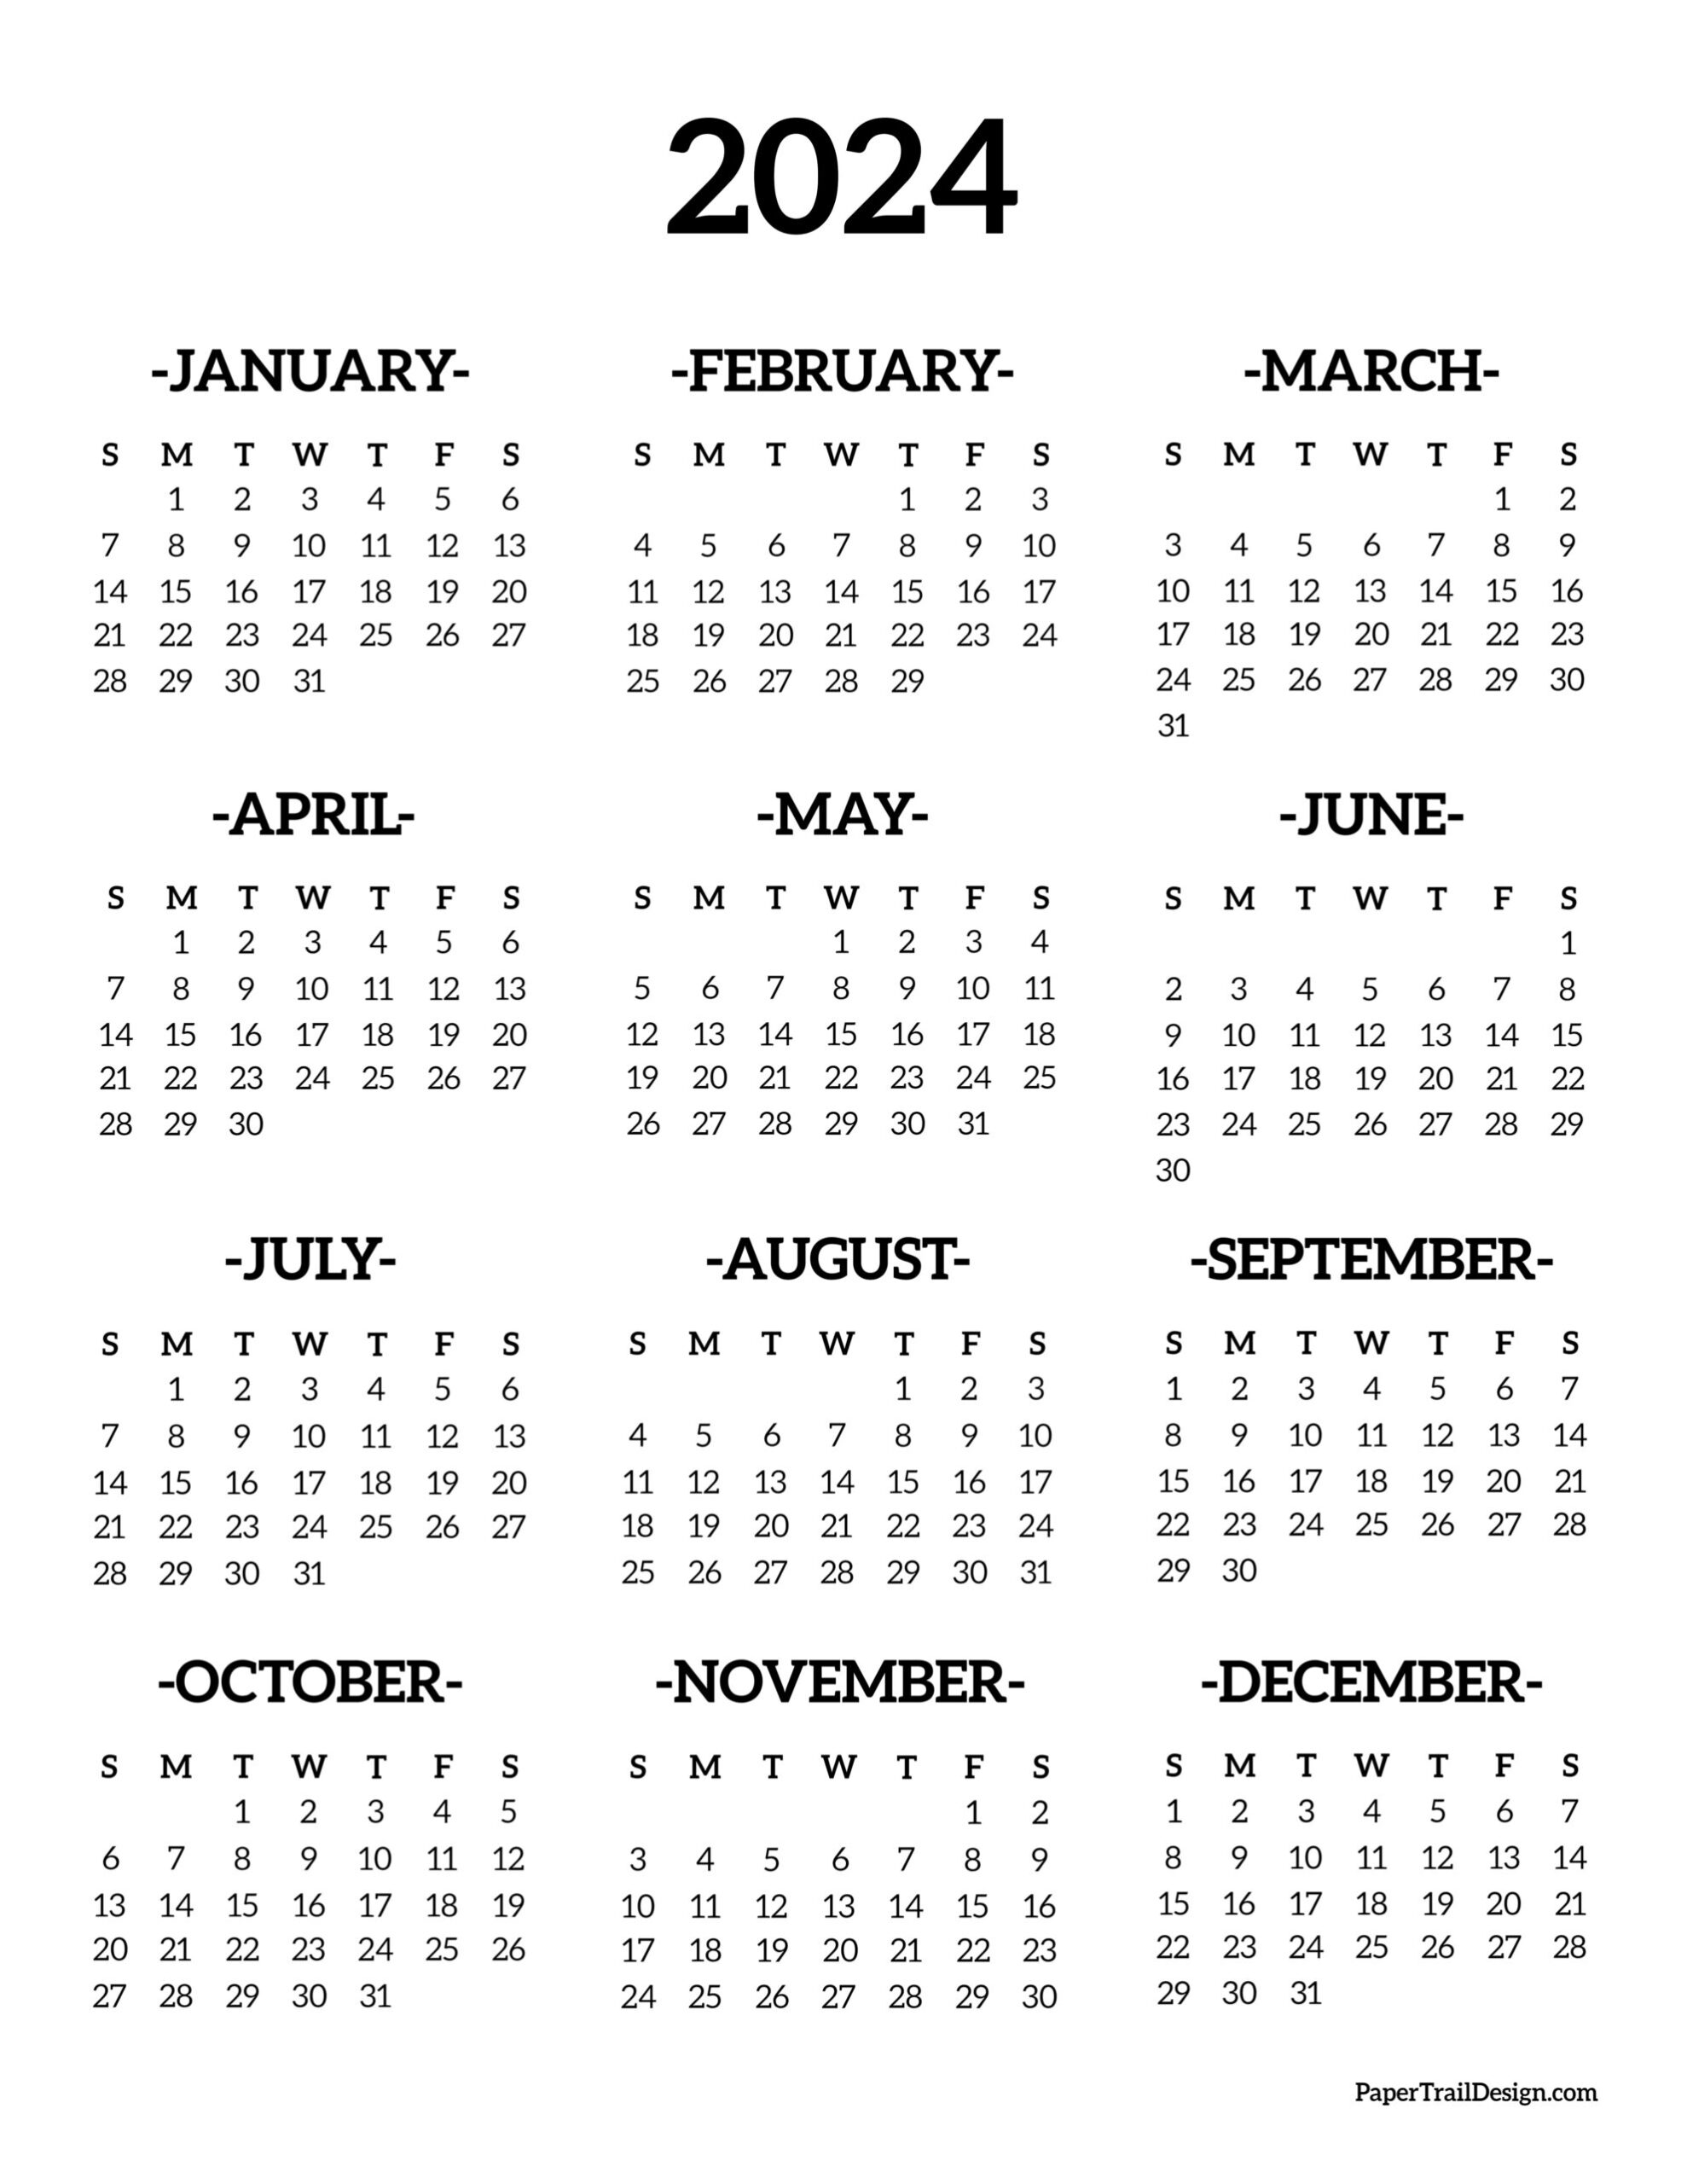 Calendar 2024 Printable One Page - Paper Trail Design for Yearly Printable Calendar 2024 Free